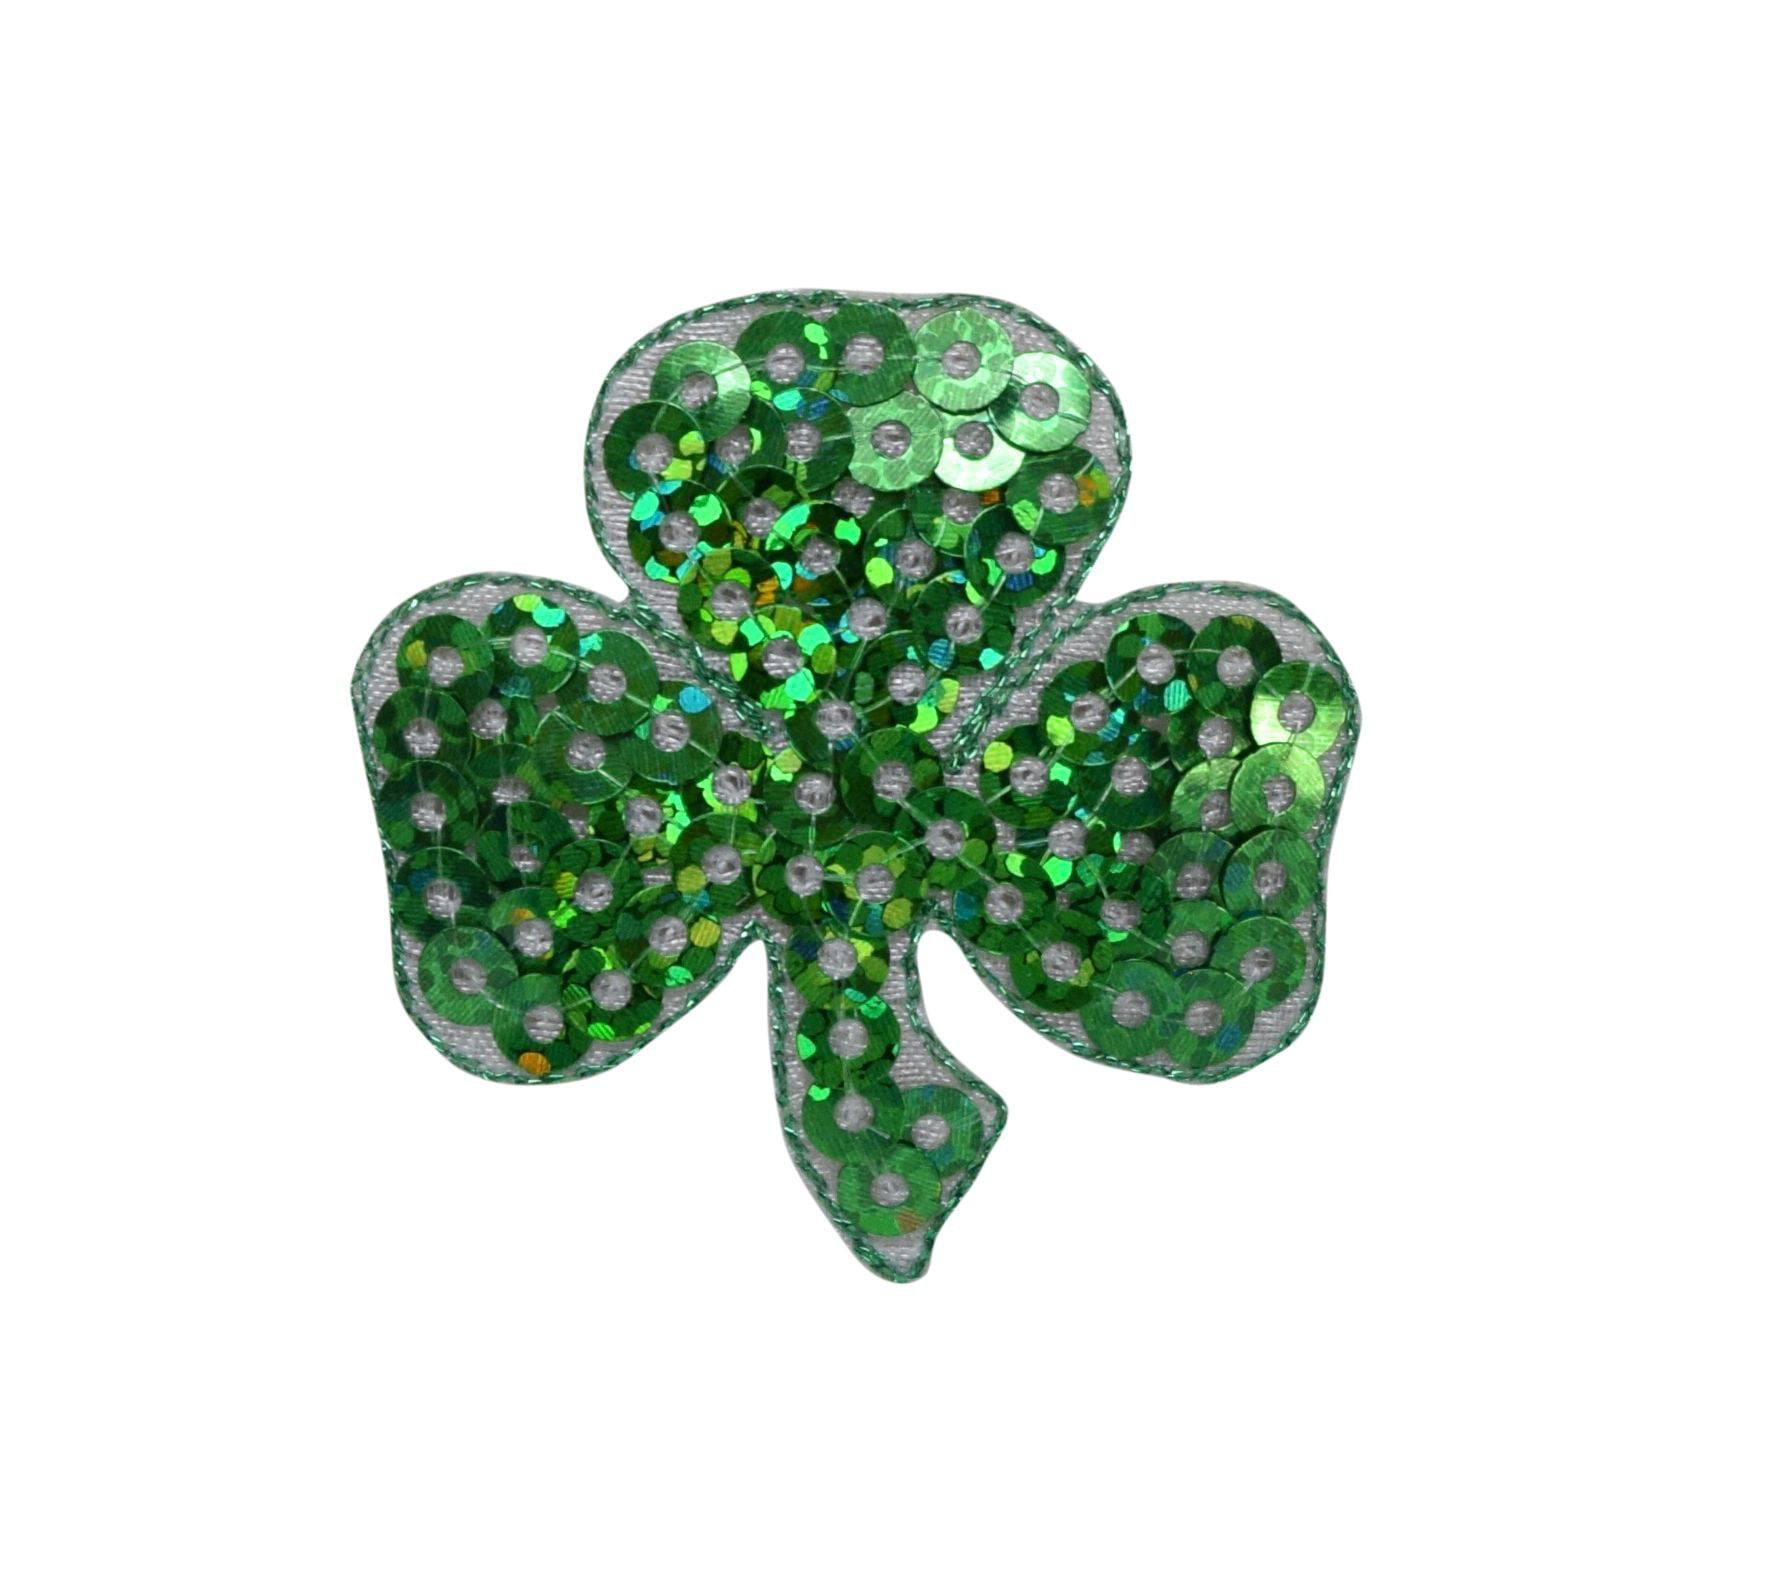 IRISH LUCKY SHAMROCK PATCH clover LARGE 13-INCHES ARCH EMBROIDERED IRON-ON BACK 